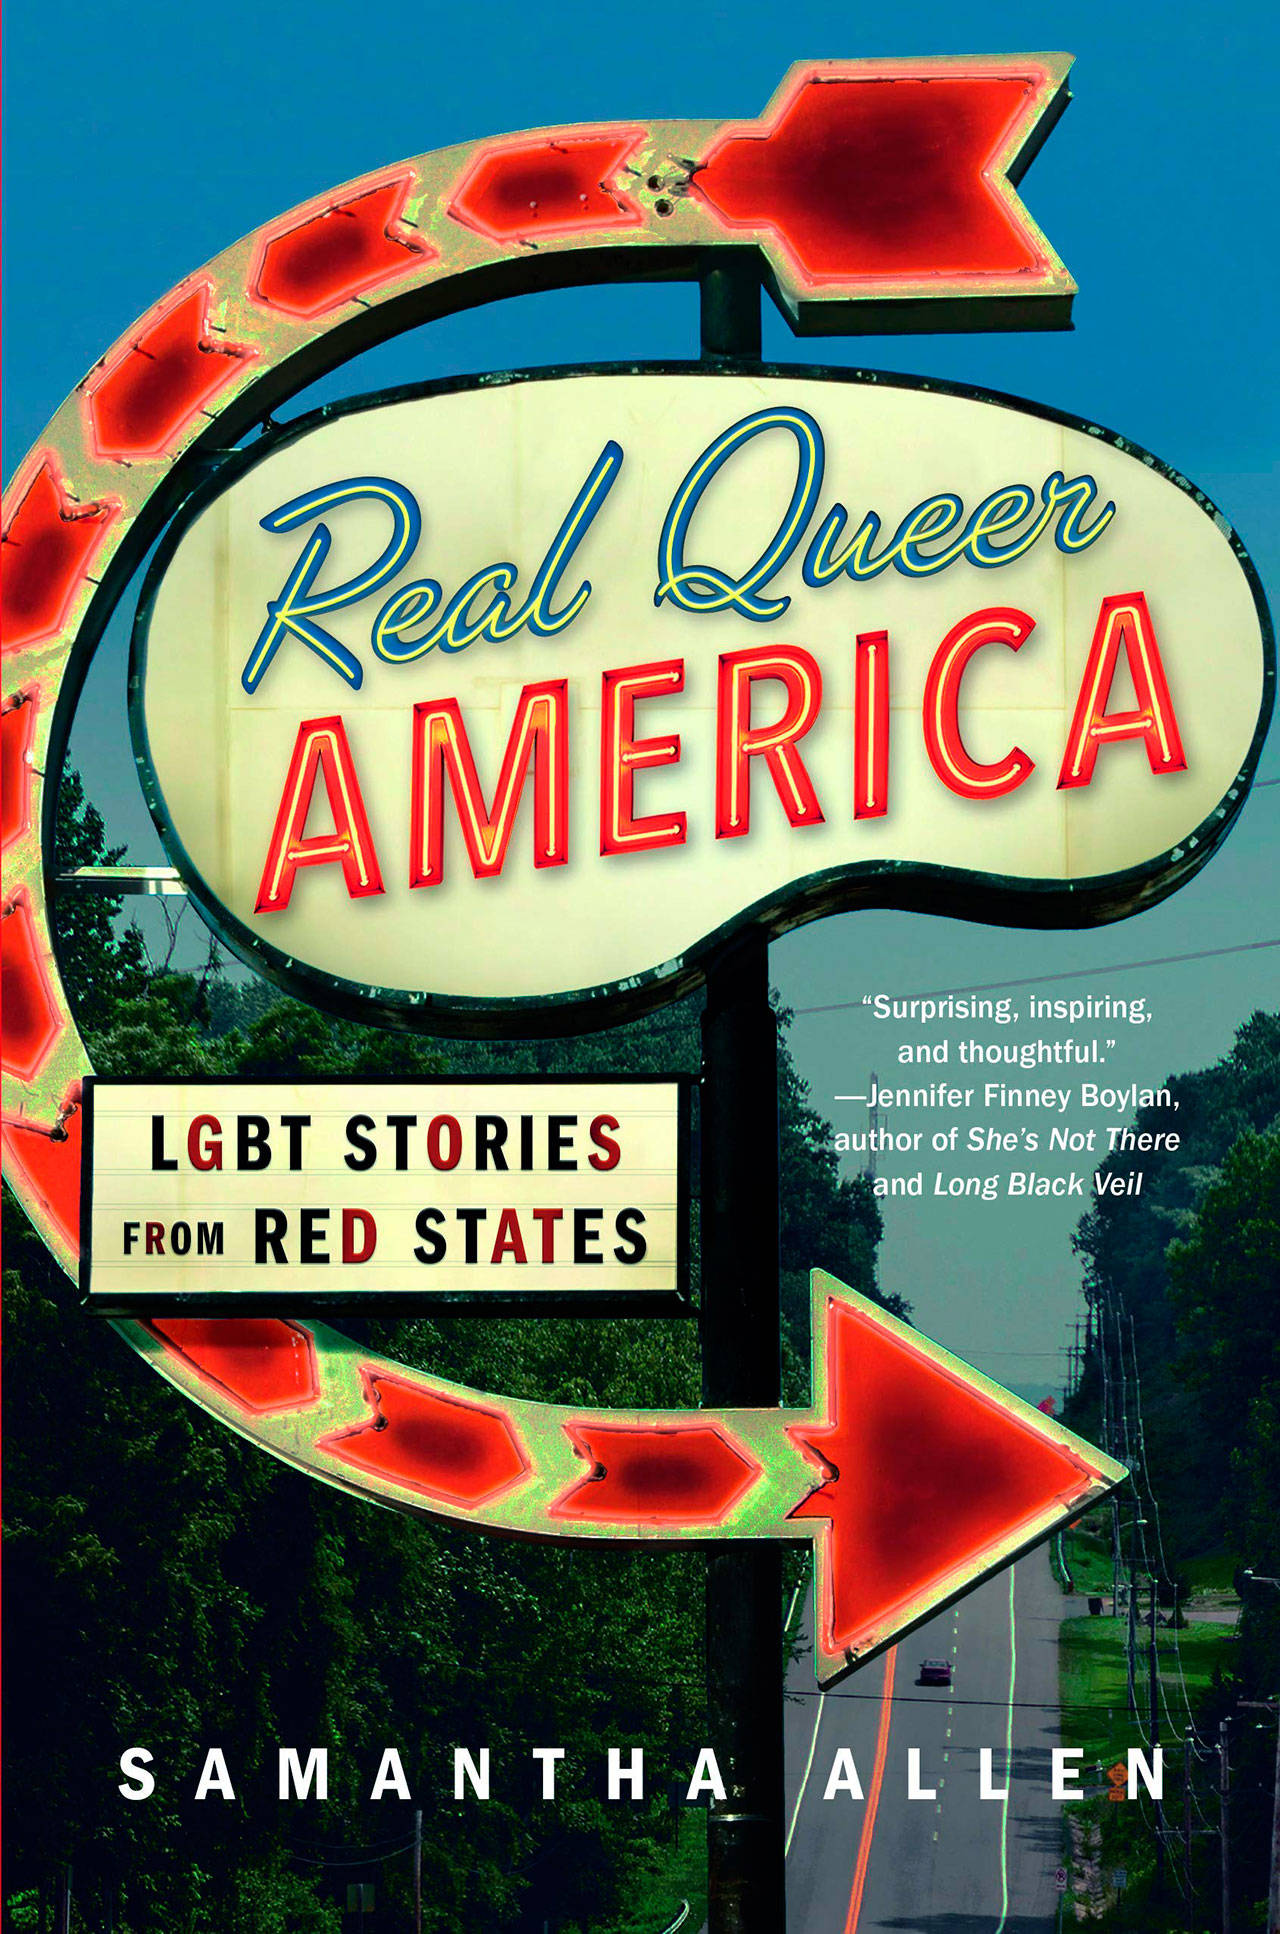 Image courtesy of Eagle Harbor Book Company | Author Samantha Allen will visit Eagle Harbor Book Company at 7 p.m. Thursday, May 2 to discuss exactly that idea and her new book “Real Queer America: LGBT Stories from Red States.”